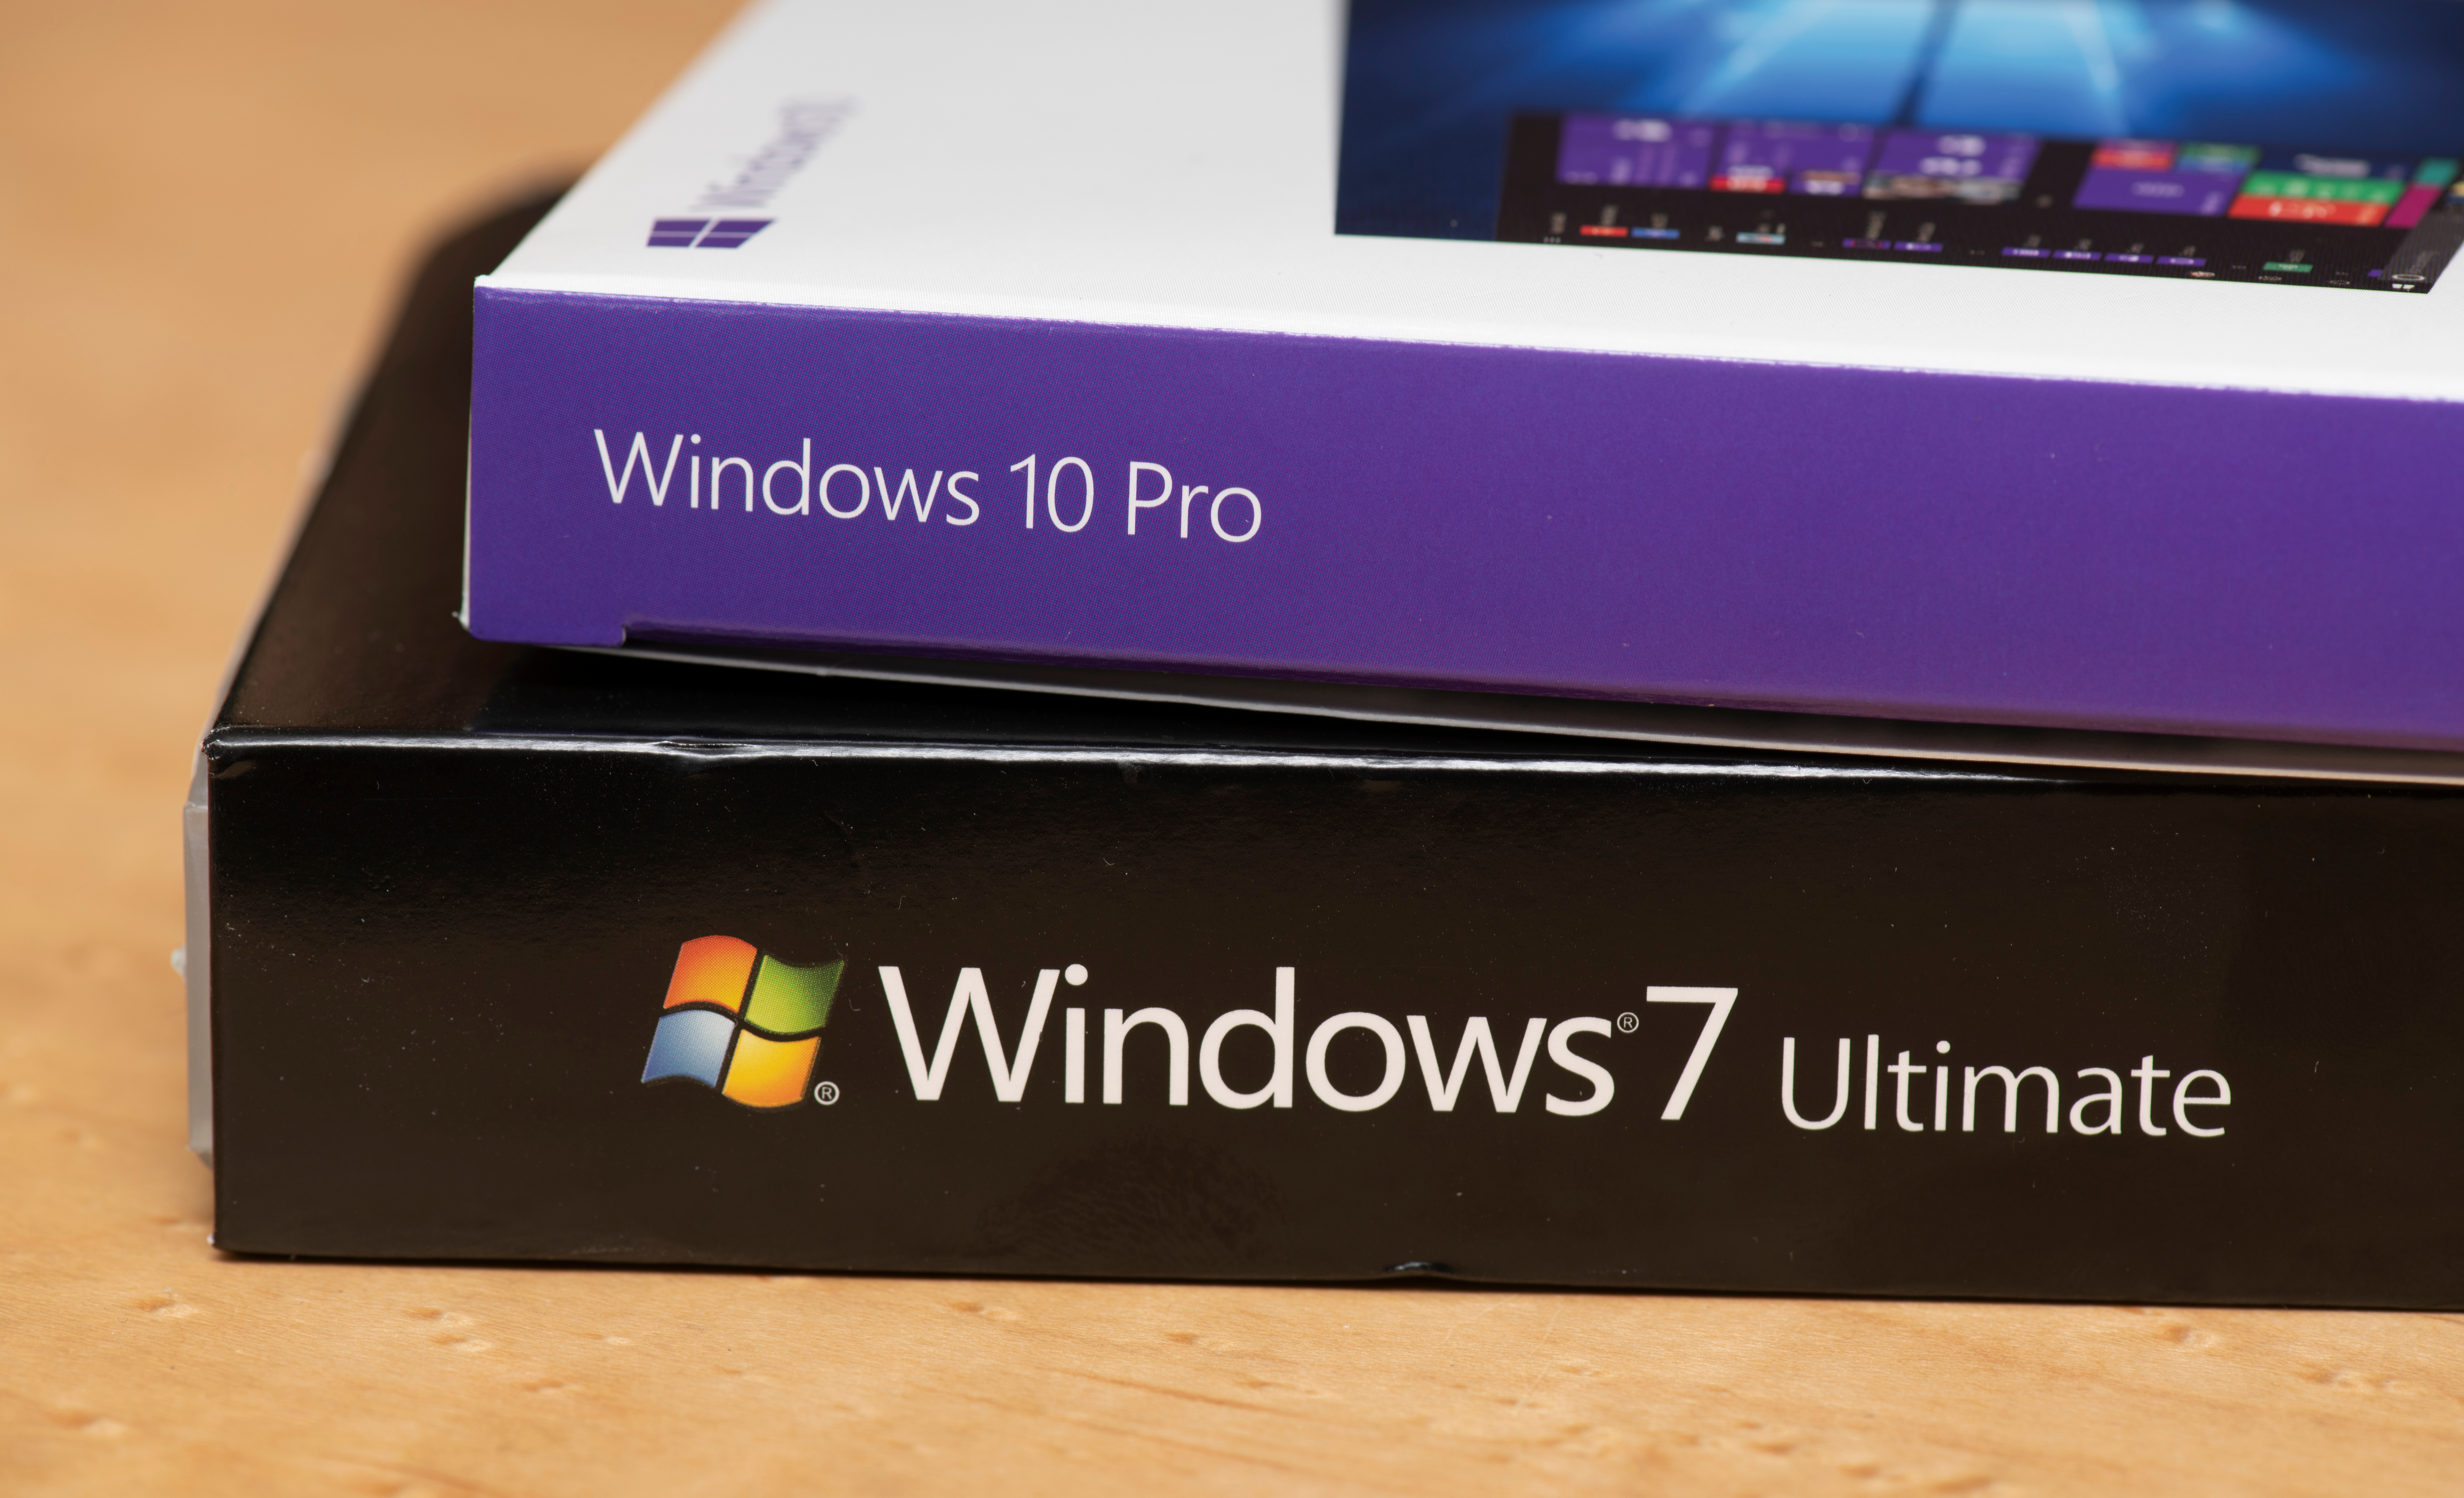 Windows 10 Pro box stacked on top of a Windows 7 ultimate box